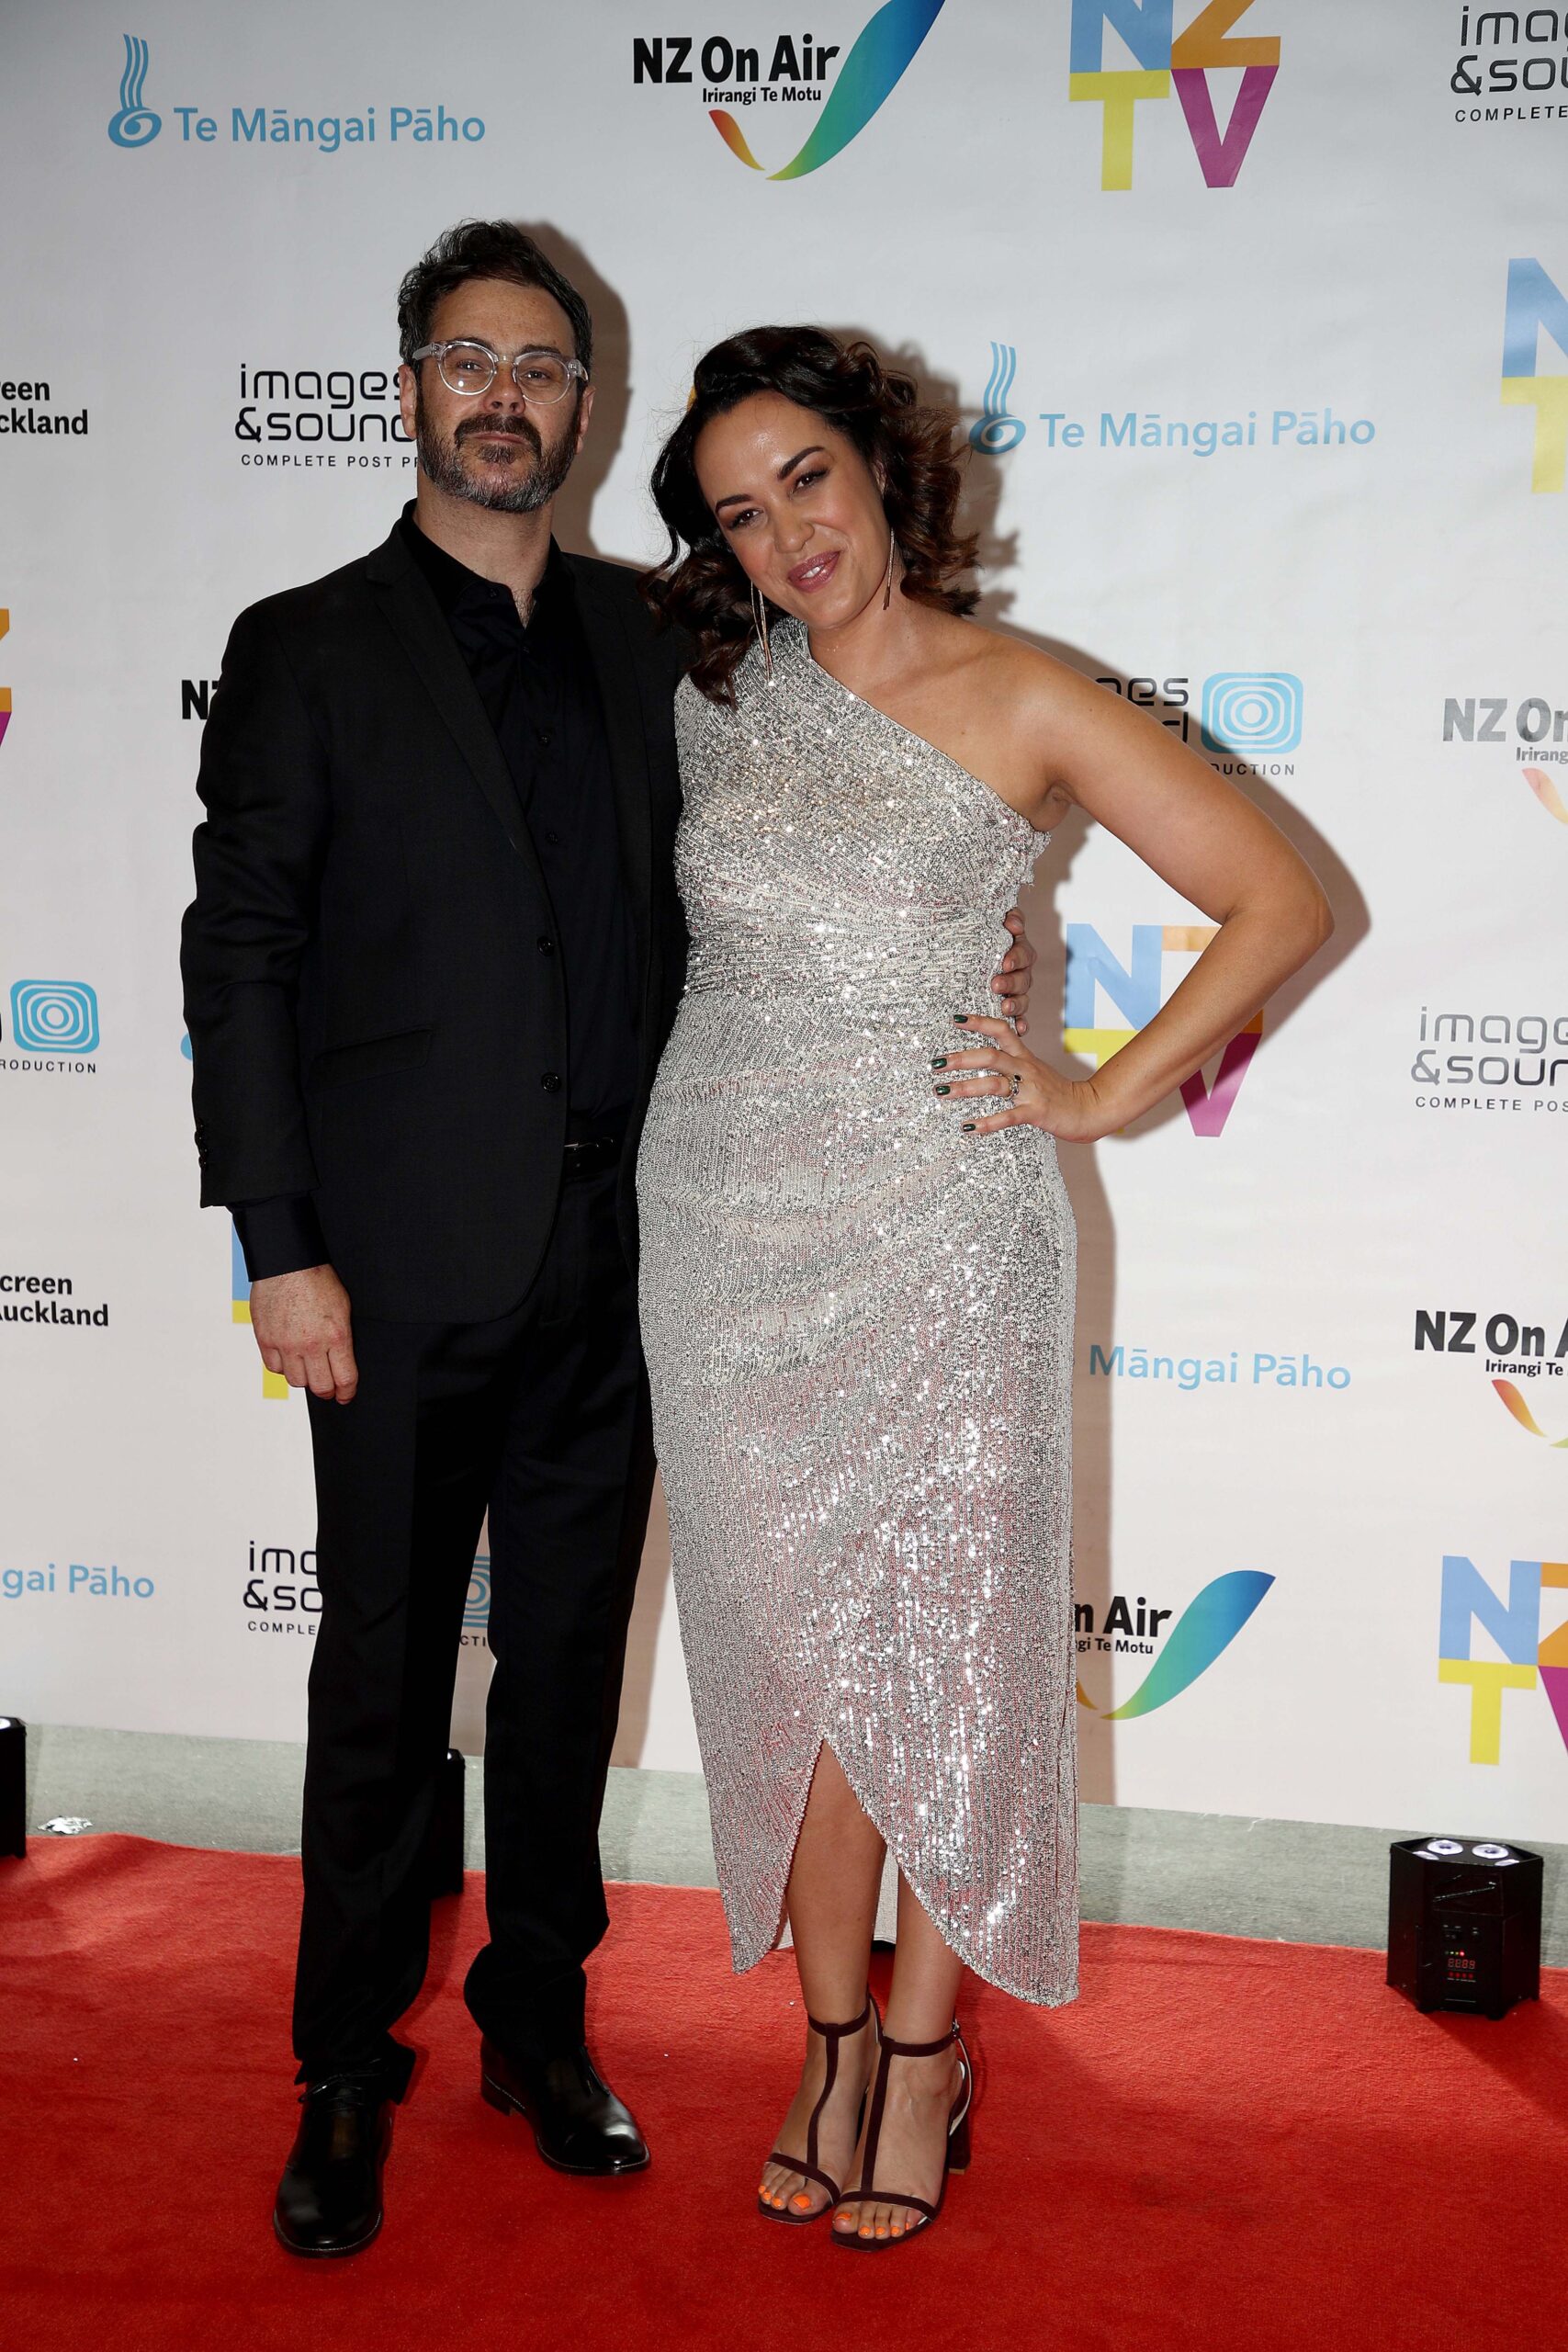 Kanoa at the 2020 NZ Television Awards with husband Mikee.